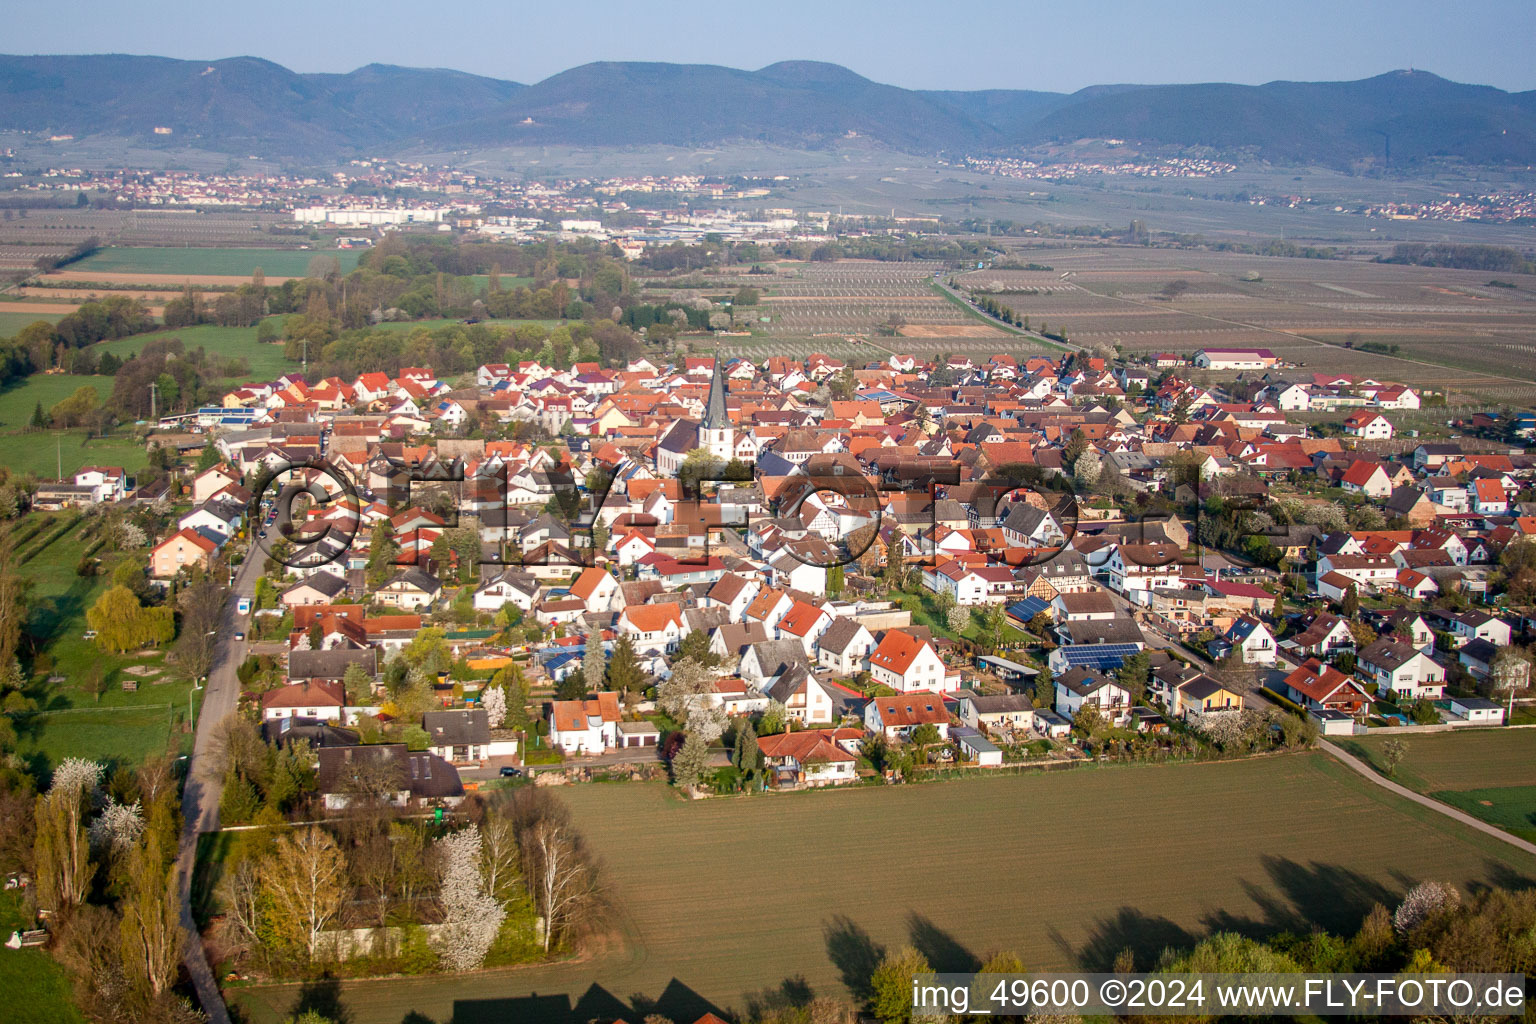 Village - view on the edge of agricultural fields and farmland in Venningen in the state Rhineland-Palatinate, Germany from the plane